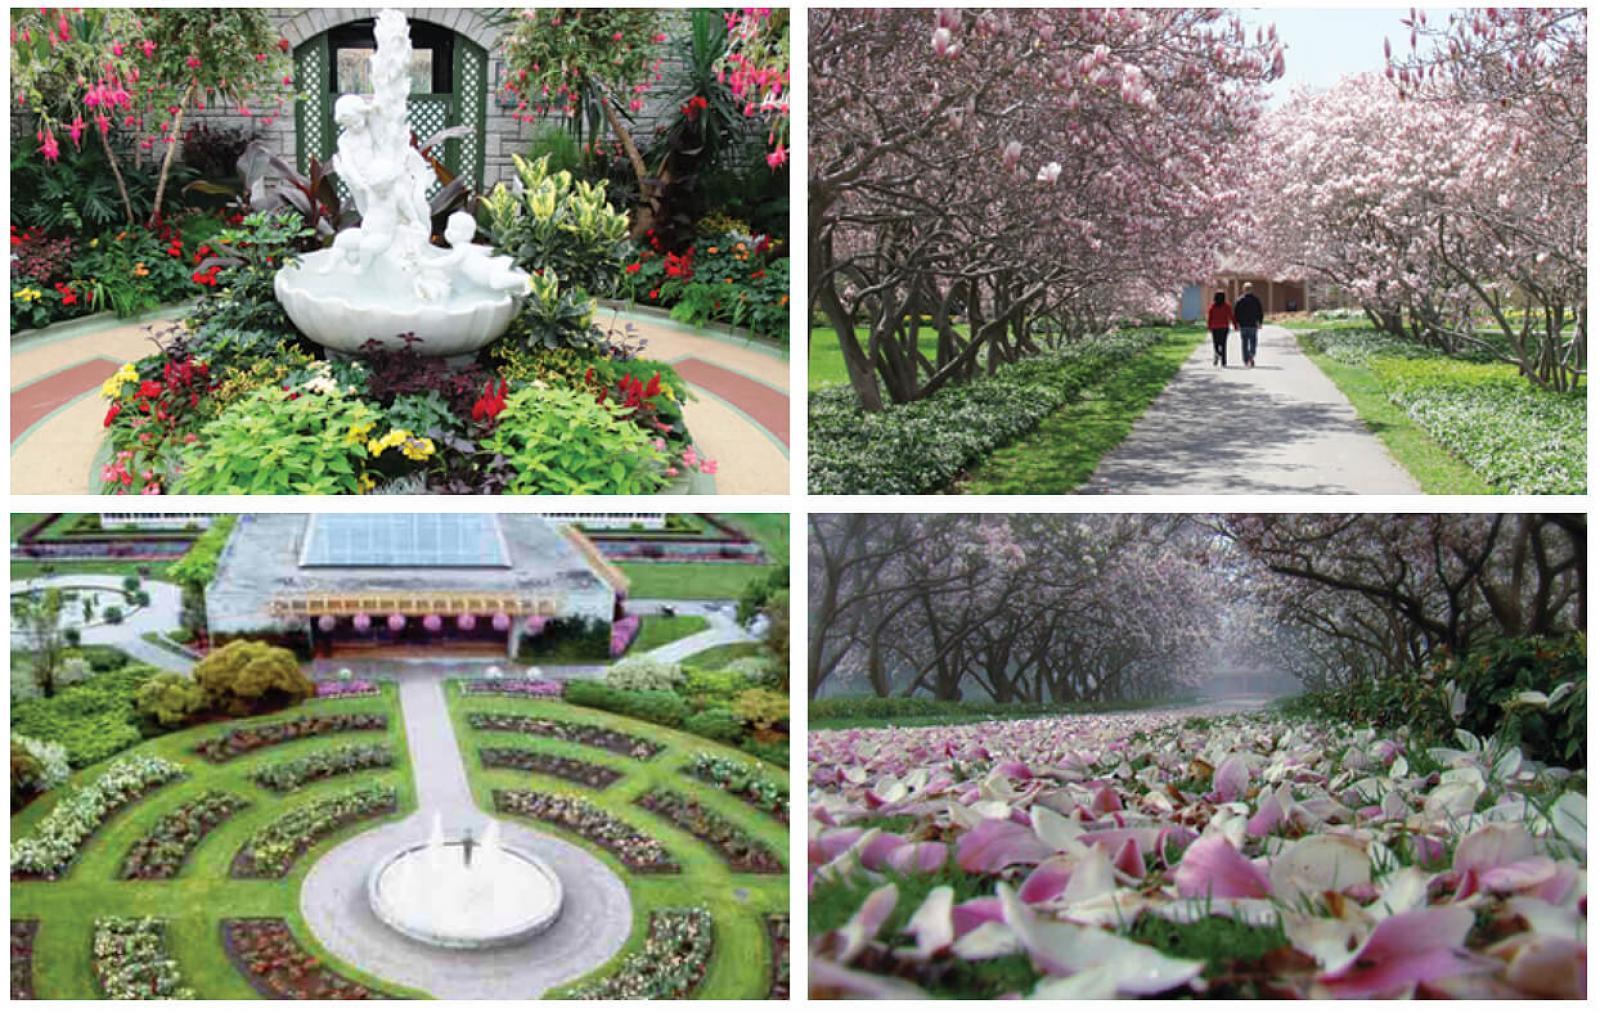 The beauty of Niagara’s parks is why it has become one of Canada’s foremost tourism destinations for garden lovers.